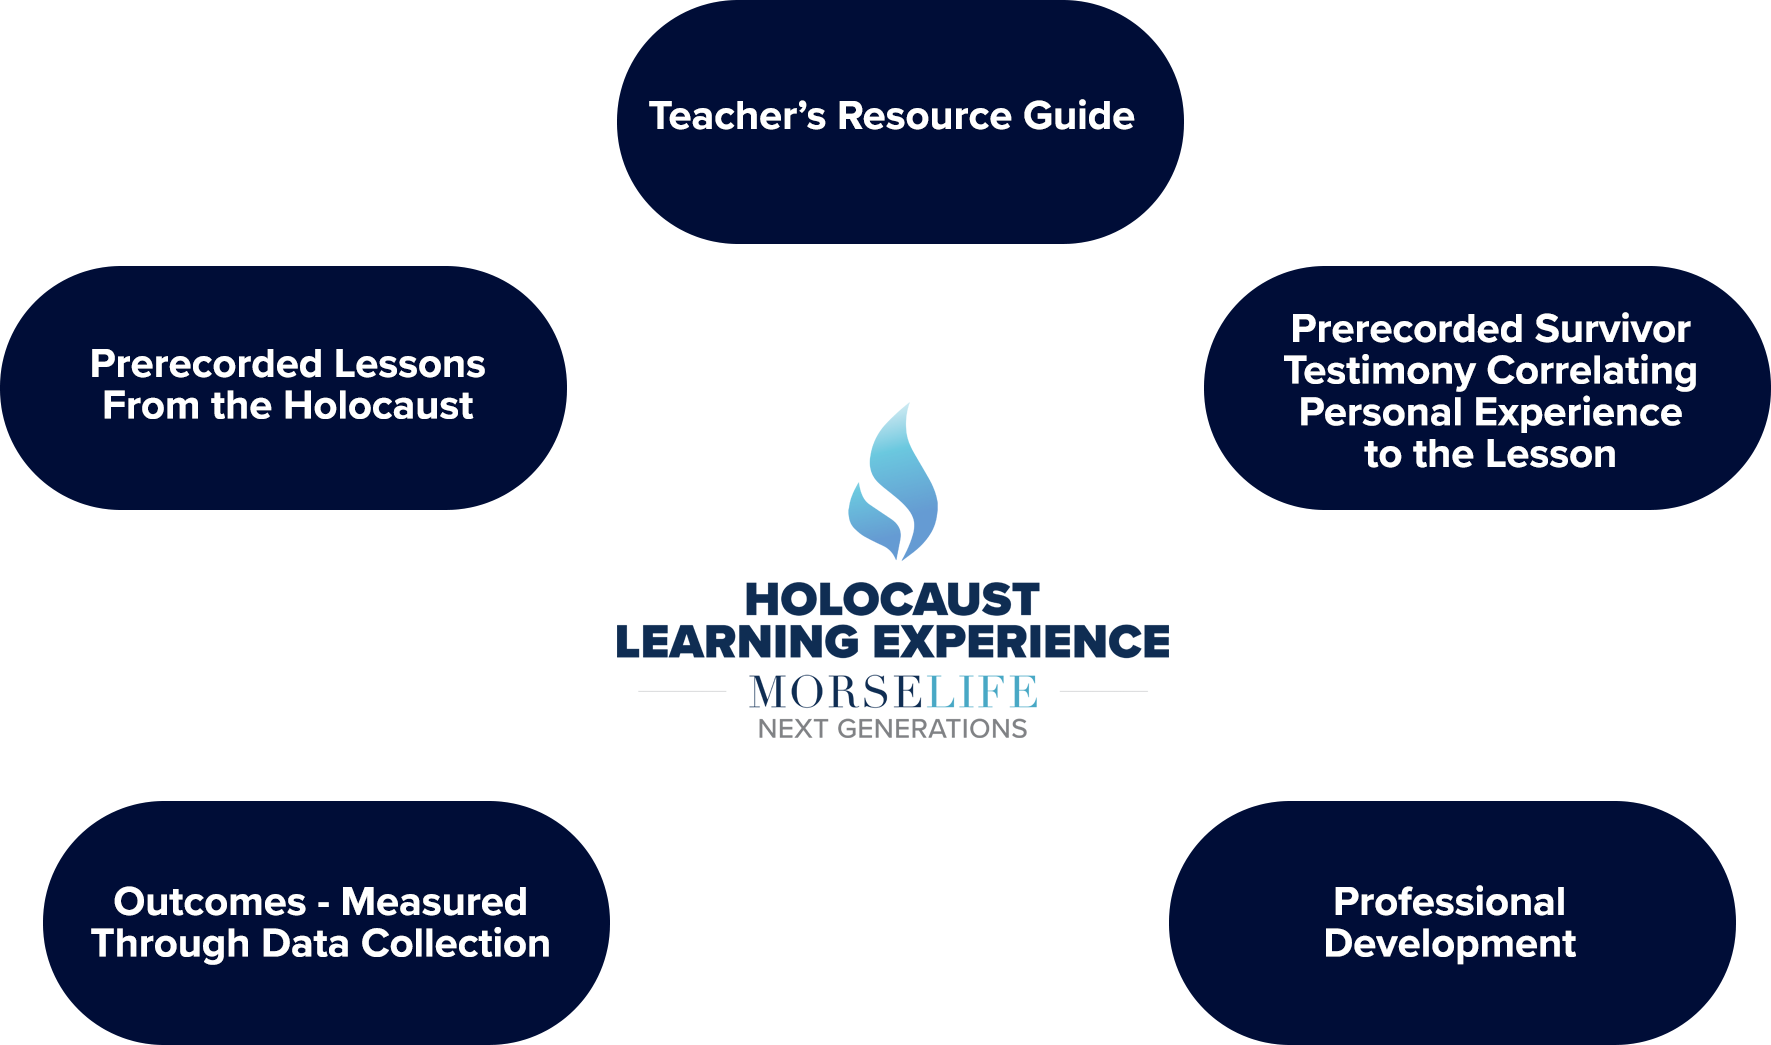 Five Elements of The Holocaust Learning Experience Signature Educational Model - 1) Teacher's Resource Guide 2) Prerecorded Lessons from the Holocaust 3) Prerecorded Survivor Testimony Correlating Personal Experience to the Lesson 4) Outcomes - Measured through data collection 5) Professional Development